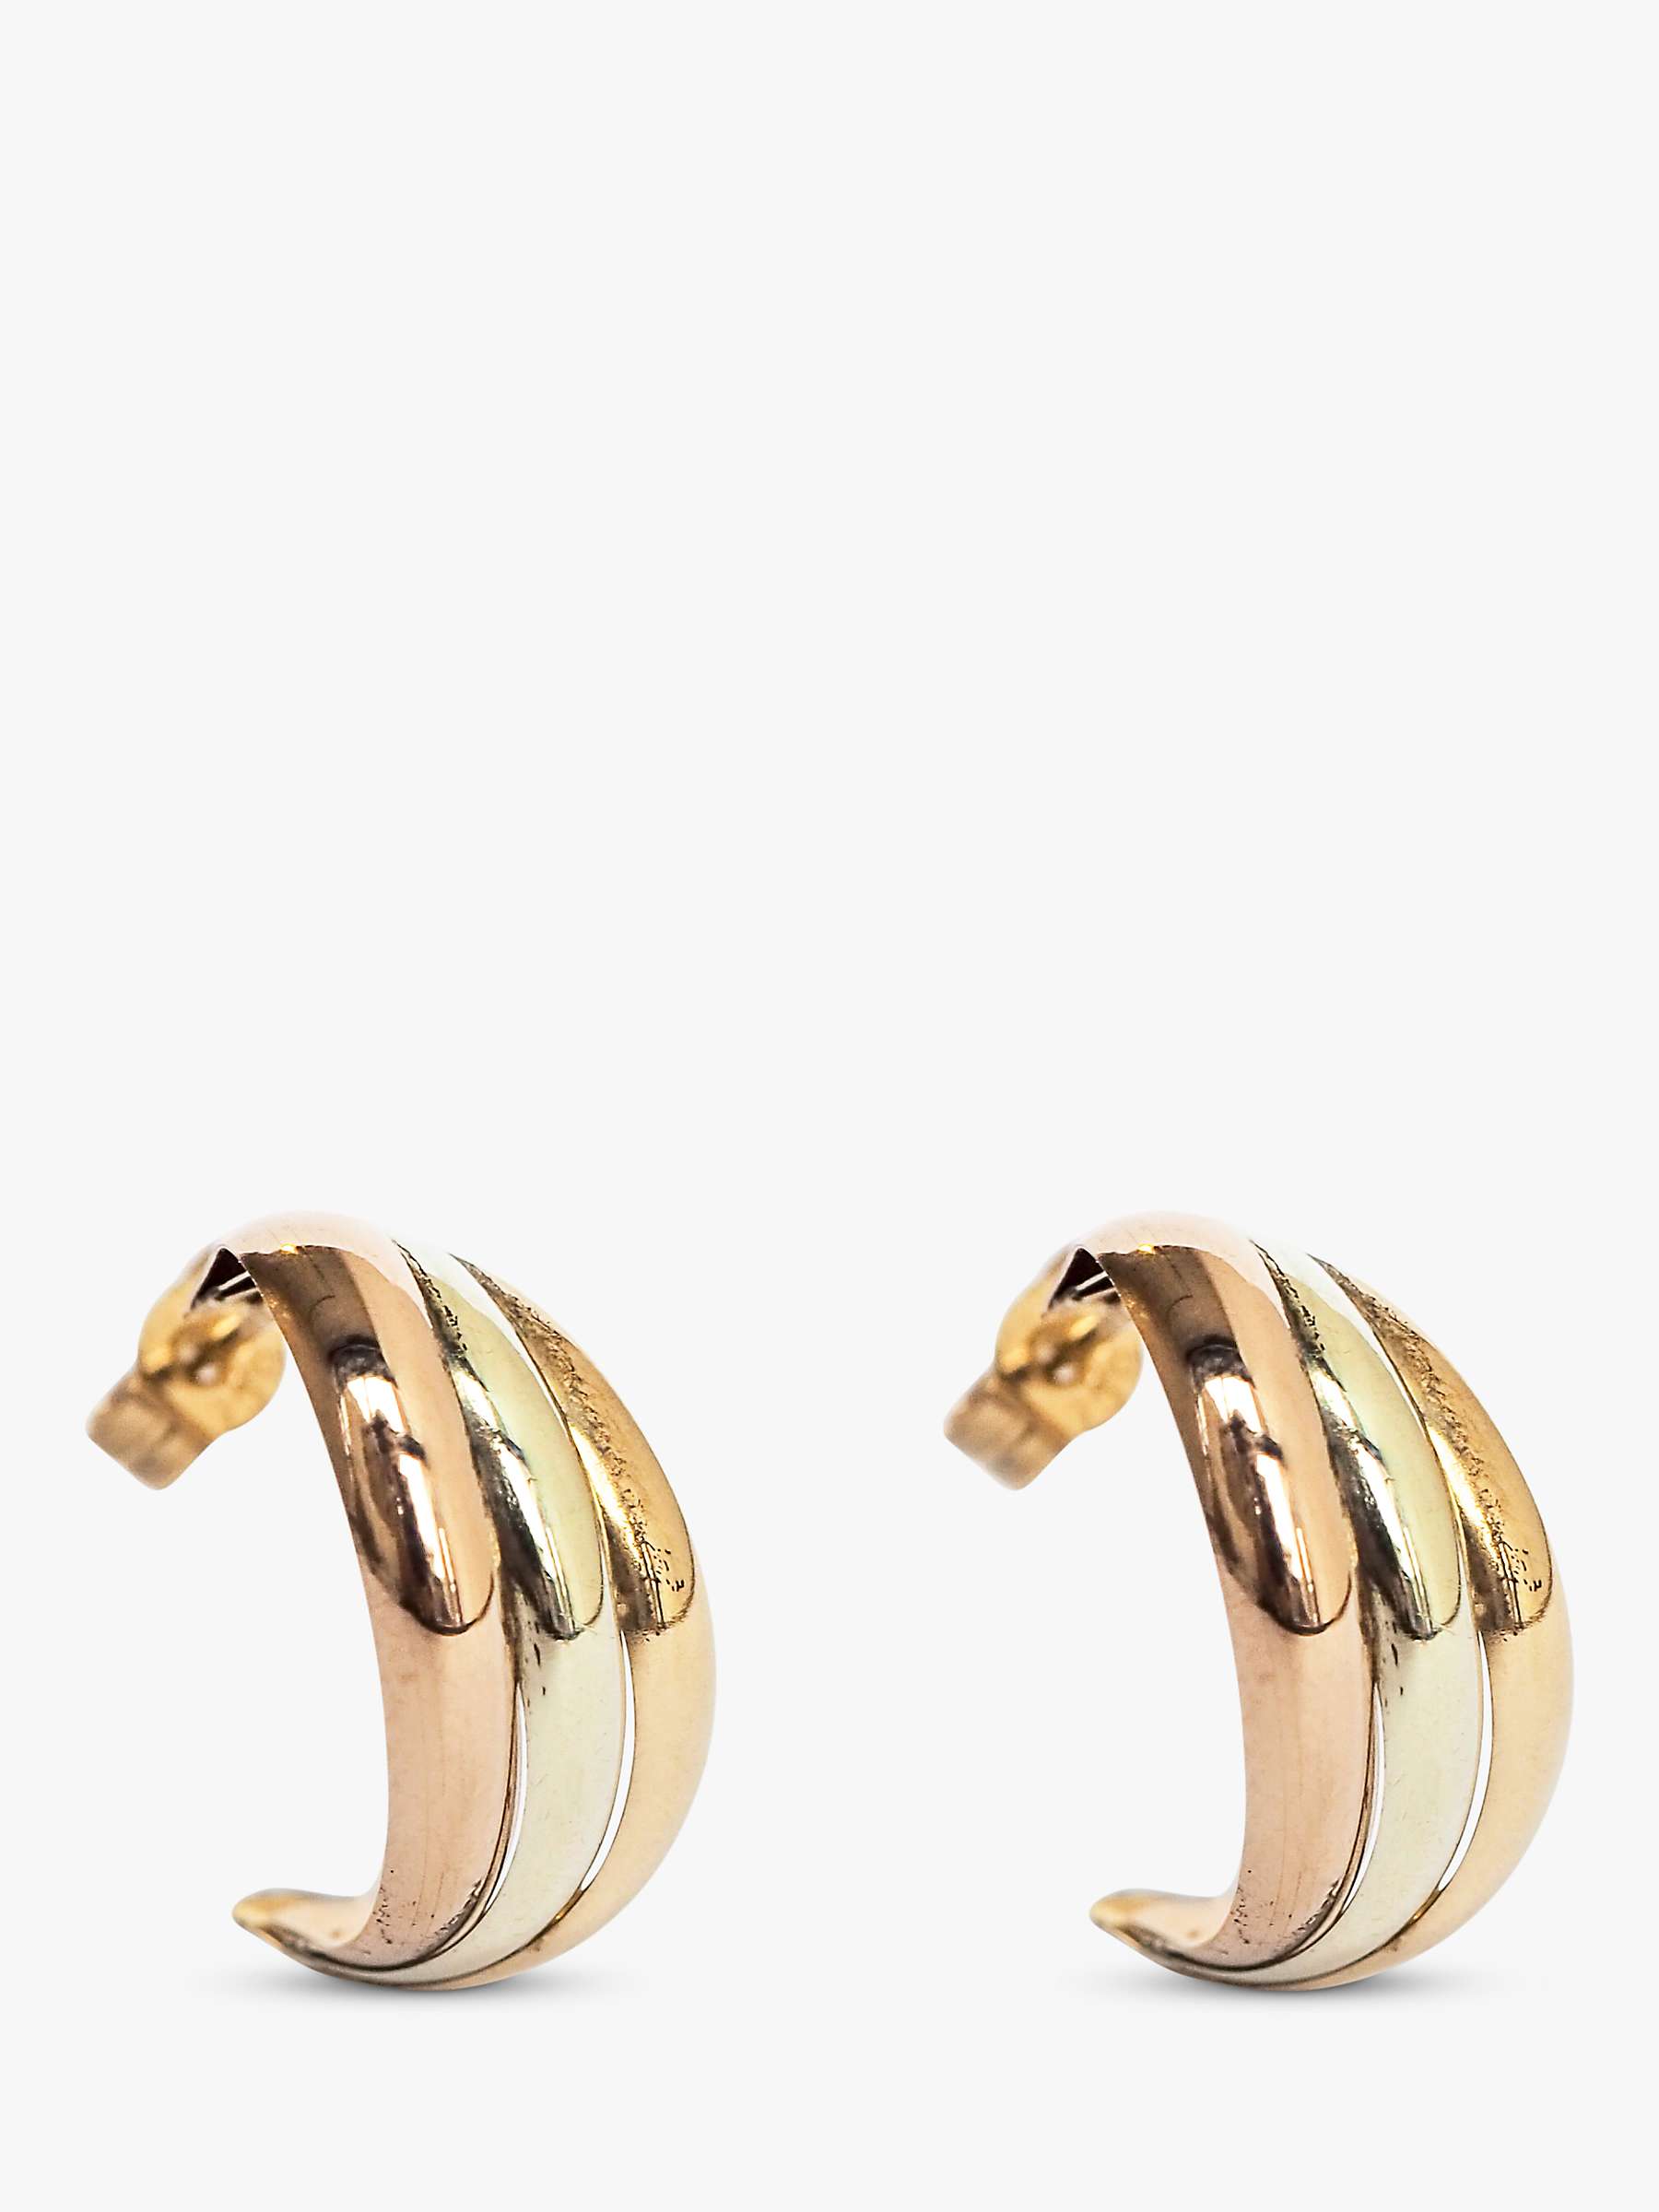 Buy L & T Heirlooms Second Hand 9ct Tri-Colour Gold Demi-Hoop Earrings Online at johnlewis.com